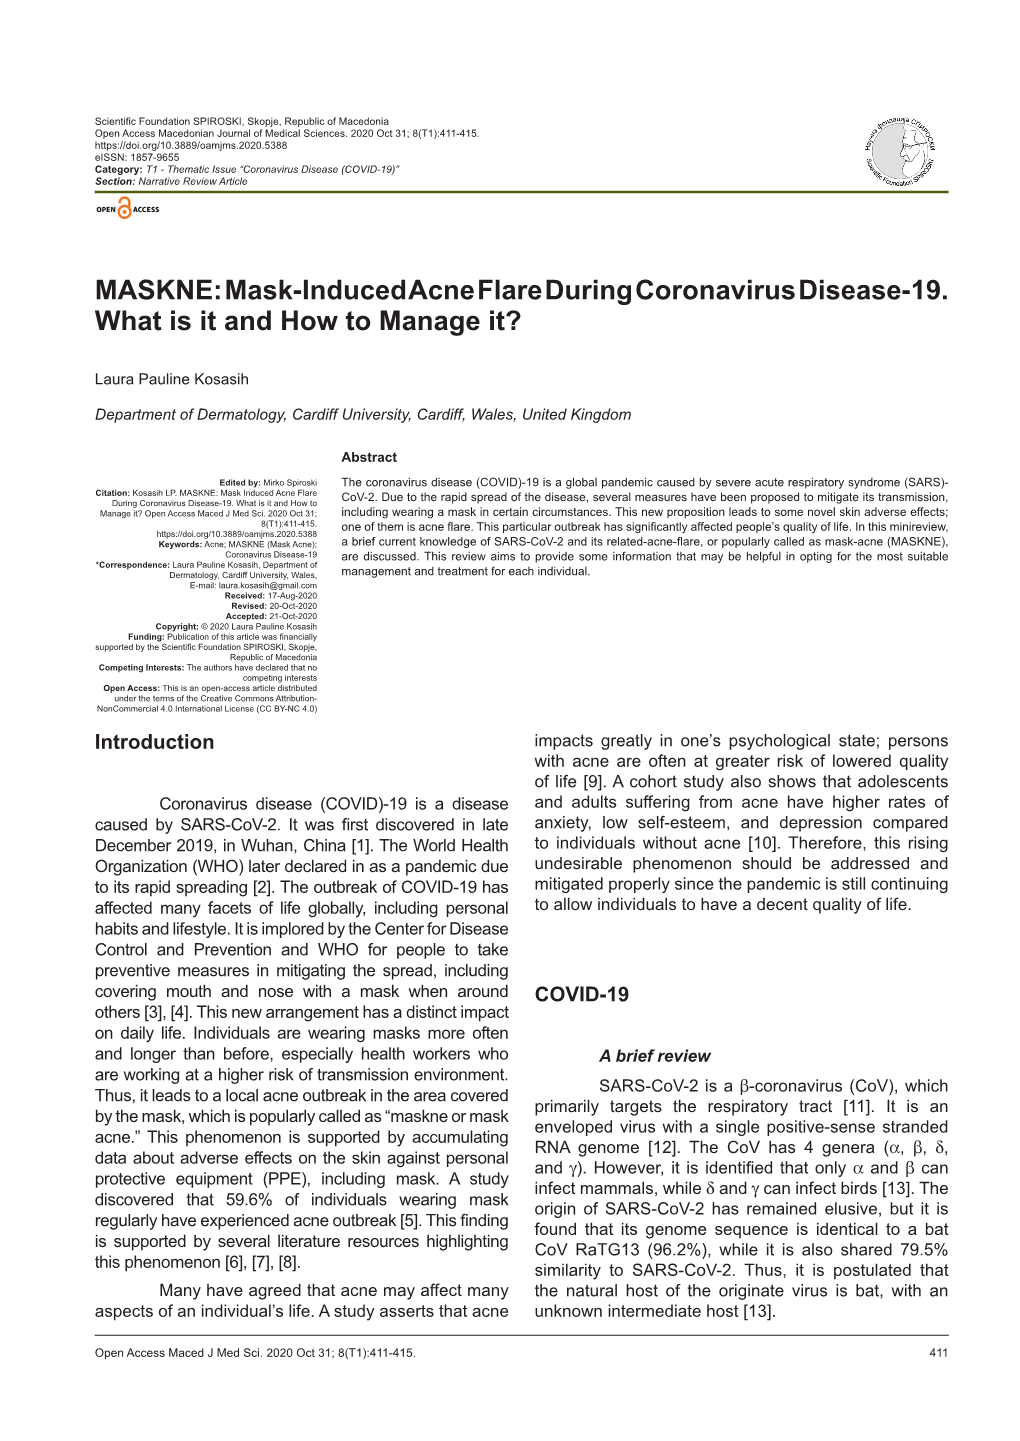 Mask-Induced Acne Flare During Coronavirus Disease-19. What Is It and How to Manage It?